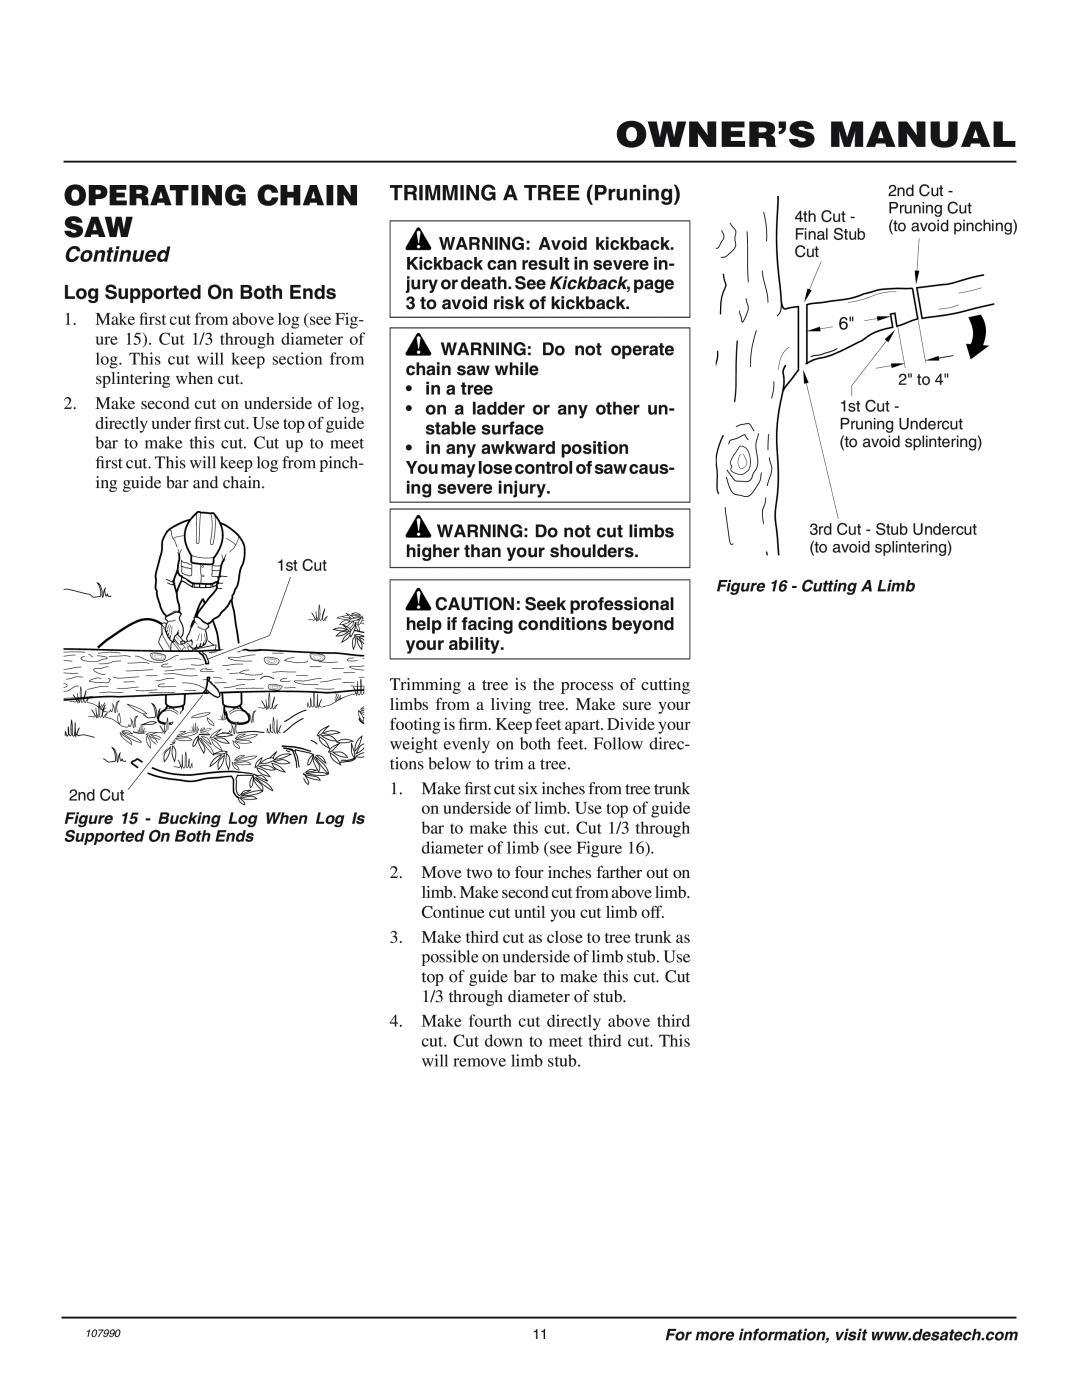 Remington owner manual TRIMMING A TREE Pruning, Log Supported On Both Ends, Owner’S Manual, Operating Chain Saw, Continued 